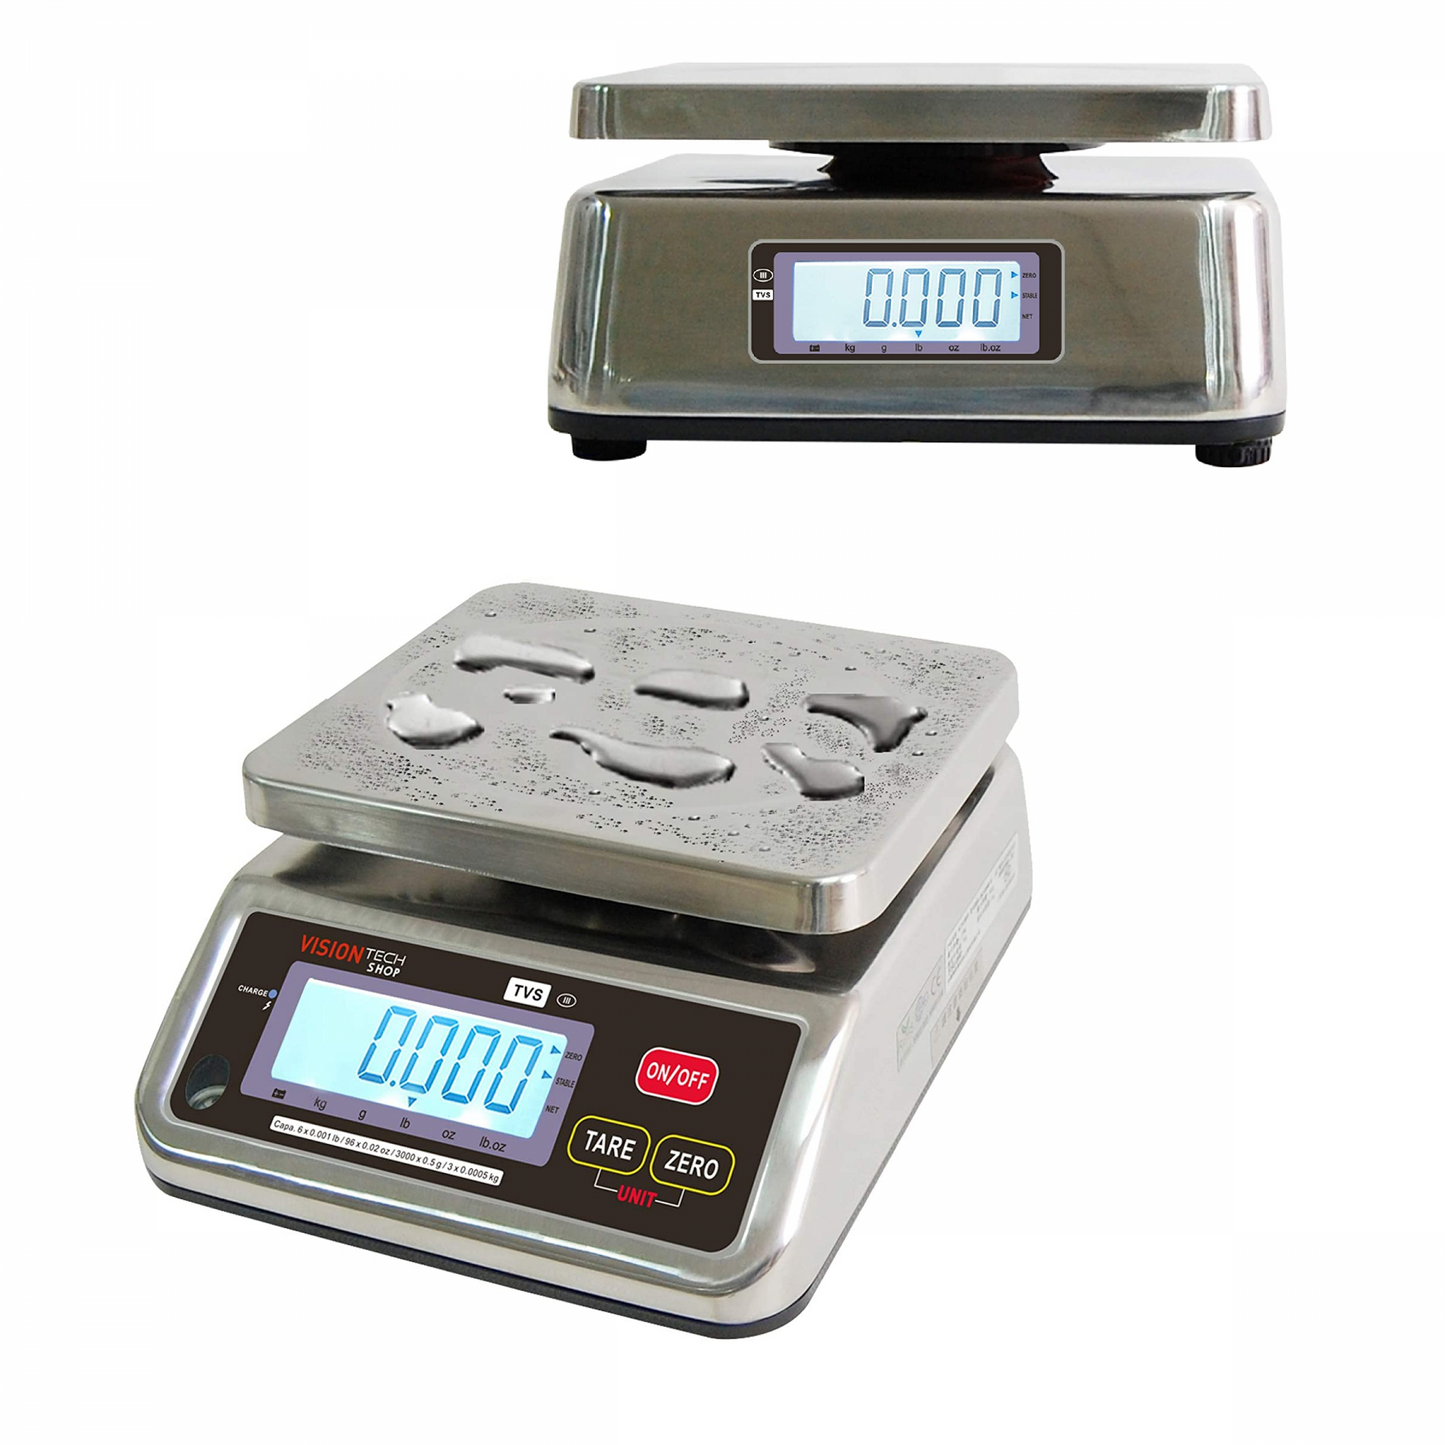 VisionTech TVS Stainless Steel/Washdown Series Portion Control Scale w/ Dual Display